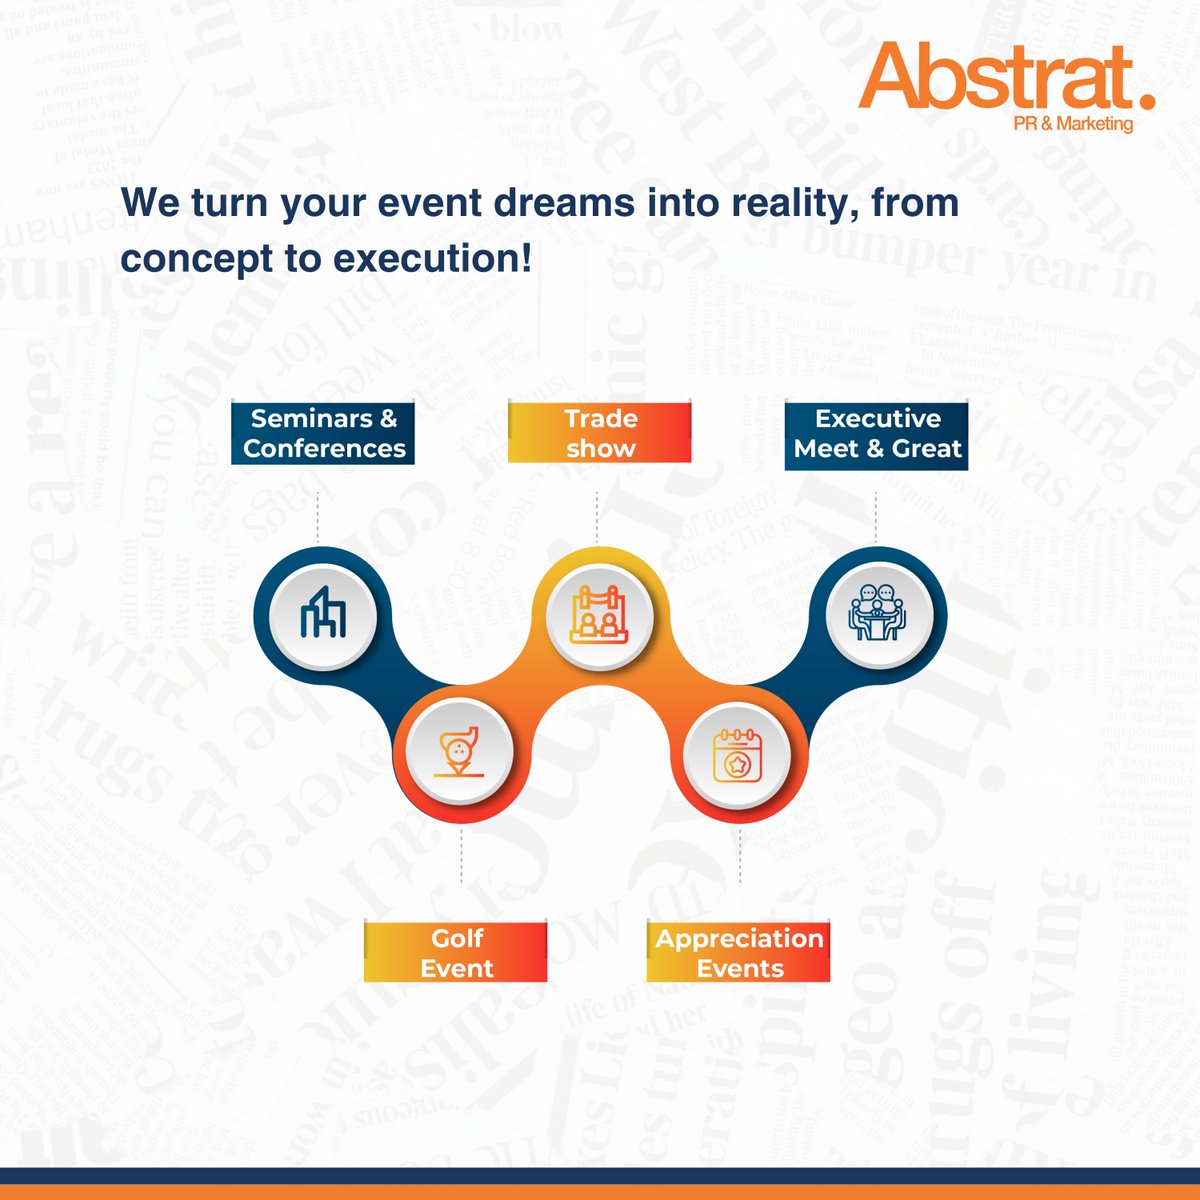 Leave the stress to us. Your event, our expertise.
#abstrattz #eventplanning #abstratpr